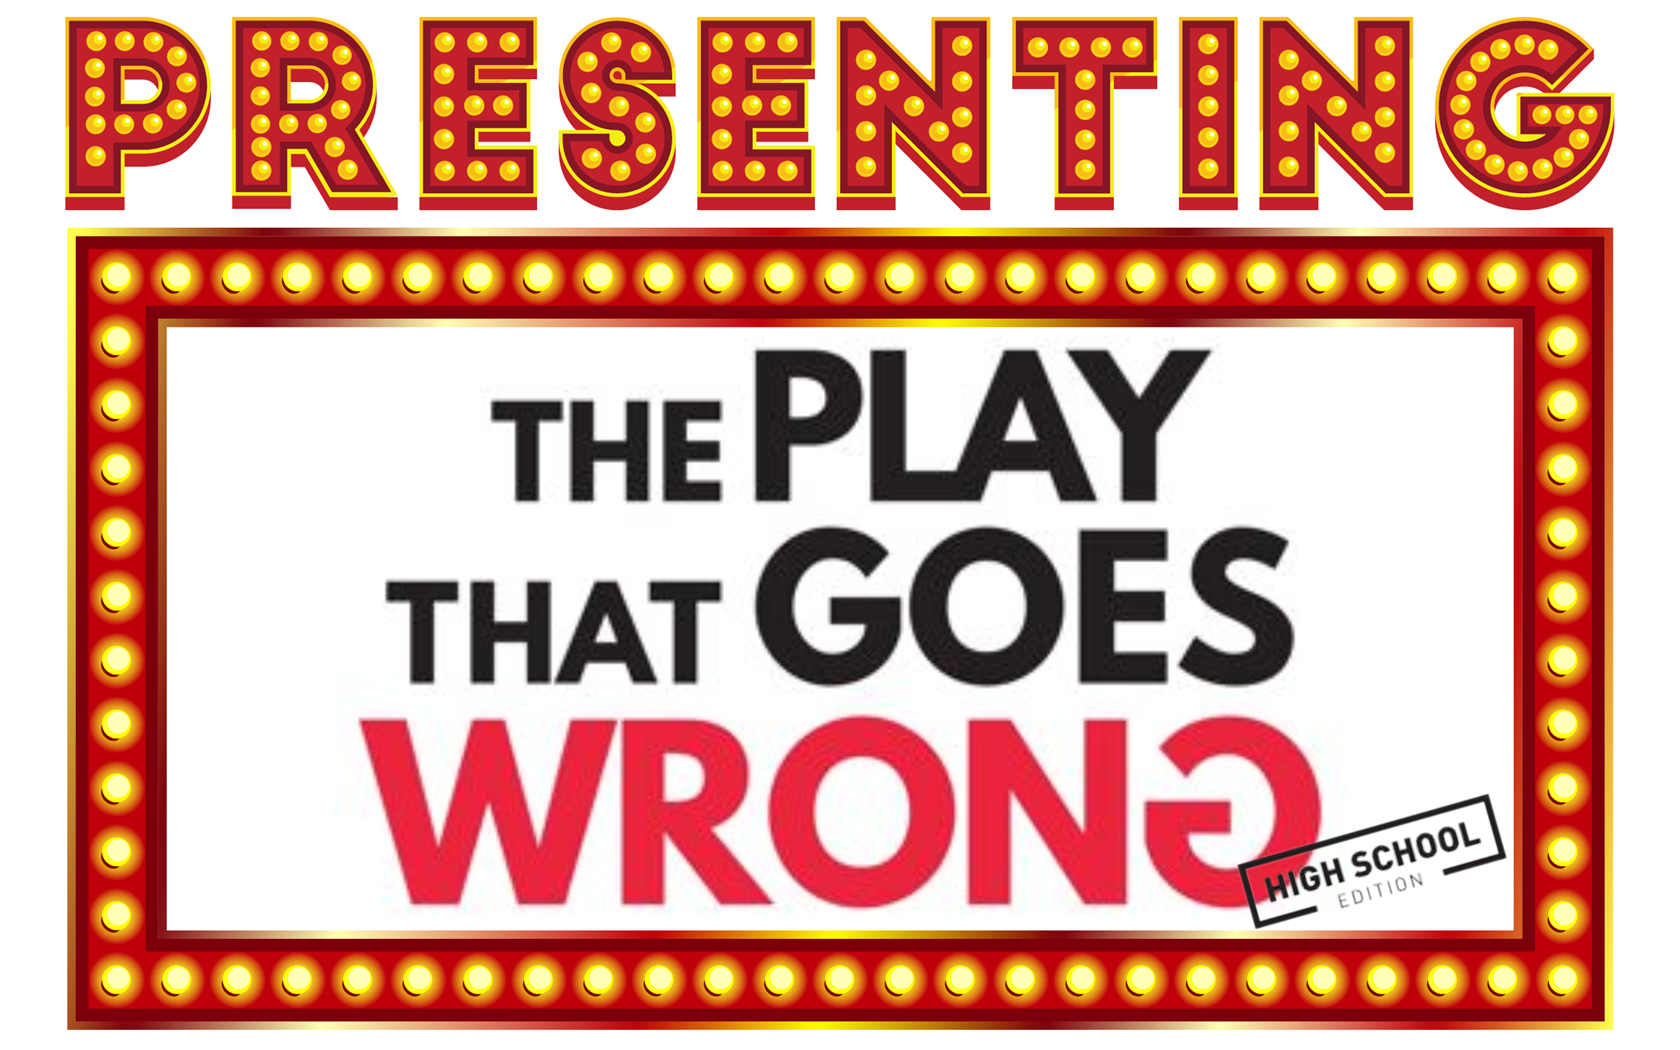 Presenting The Play That Goes Wrong